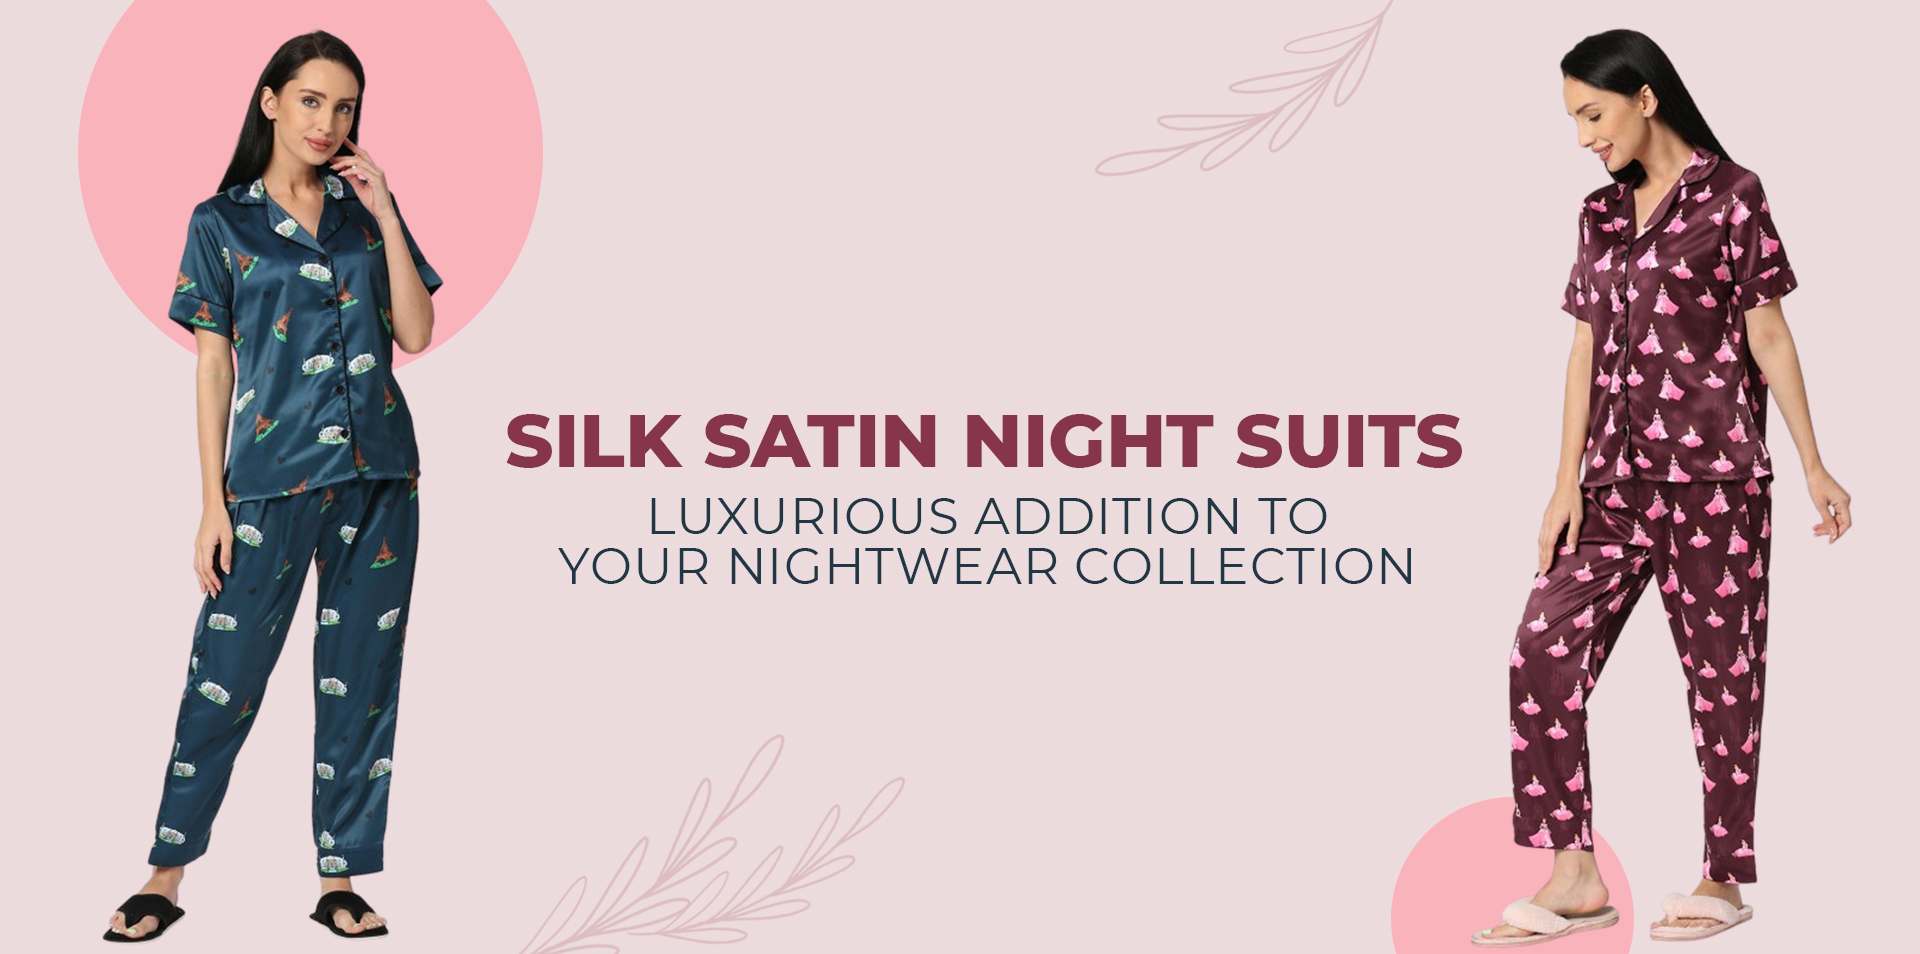 Silk Satin Night Suits: Luxurious Addition to Your Nightwear Collection